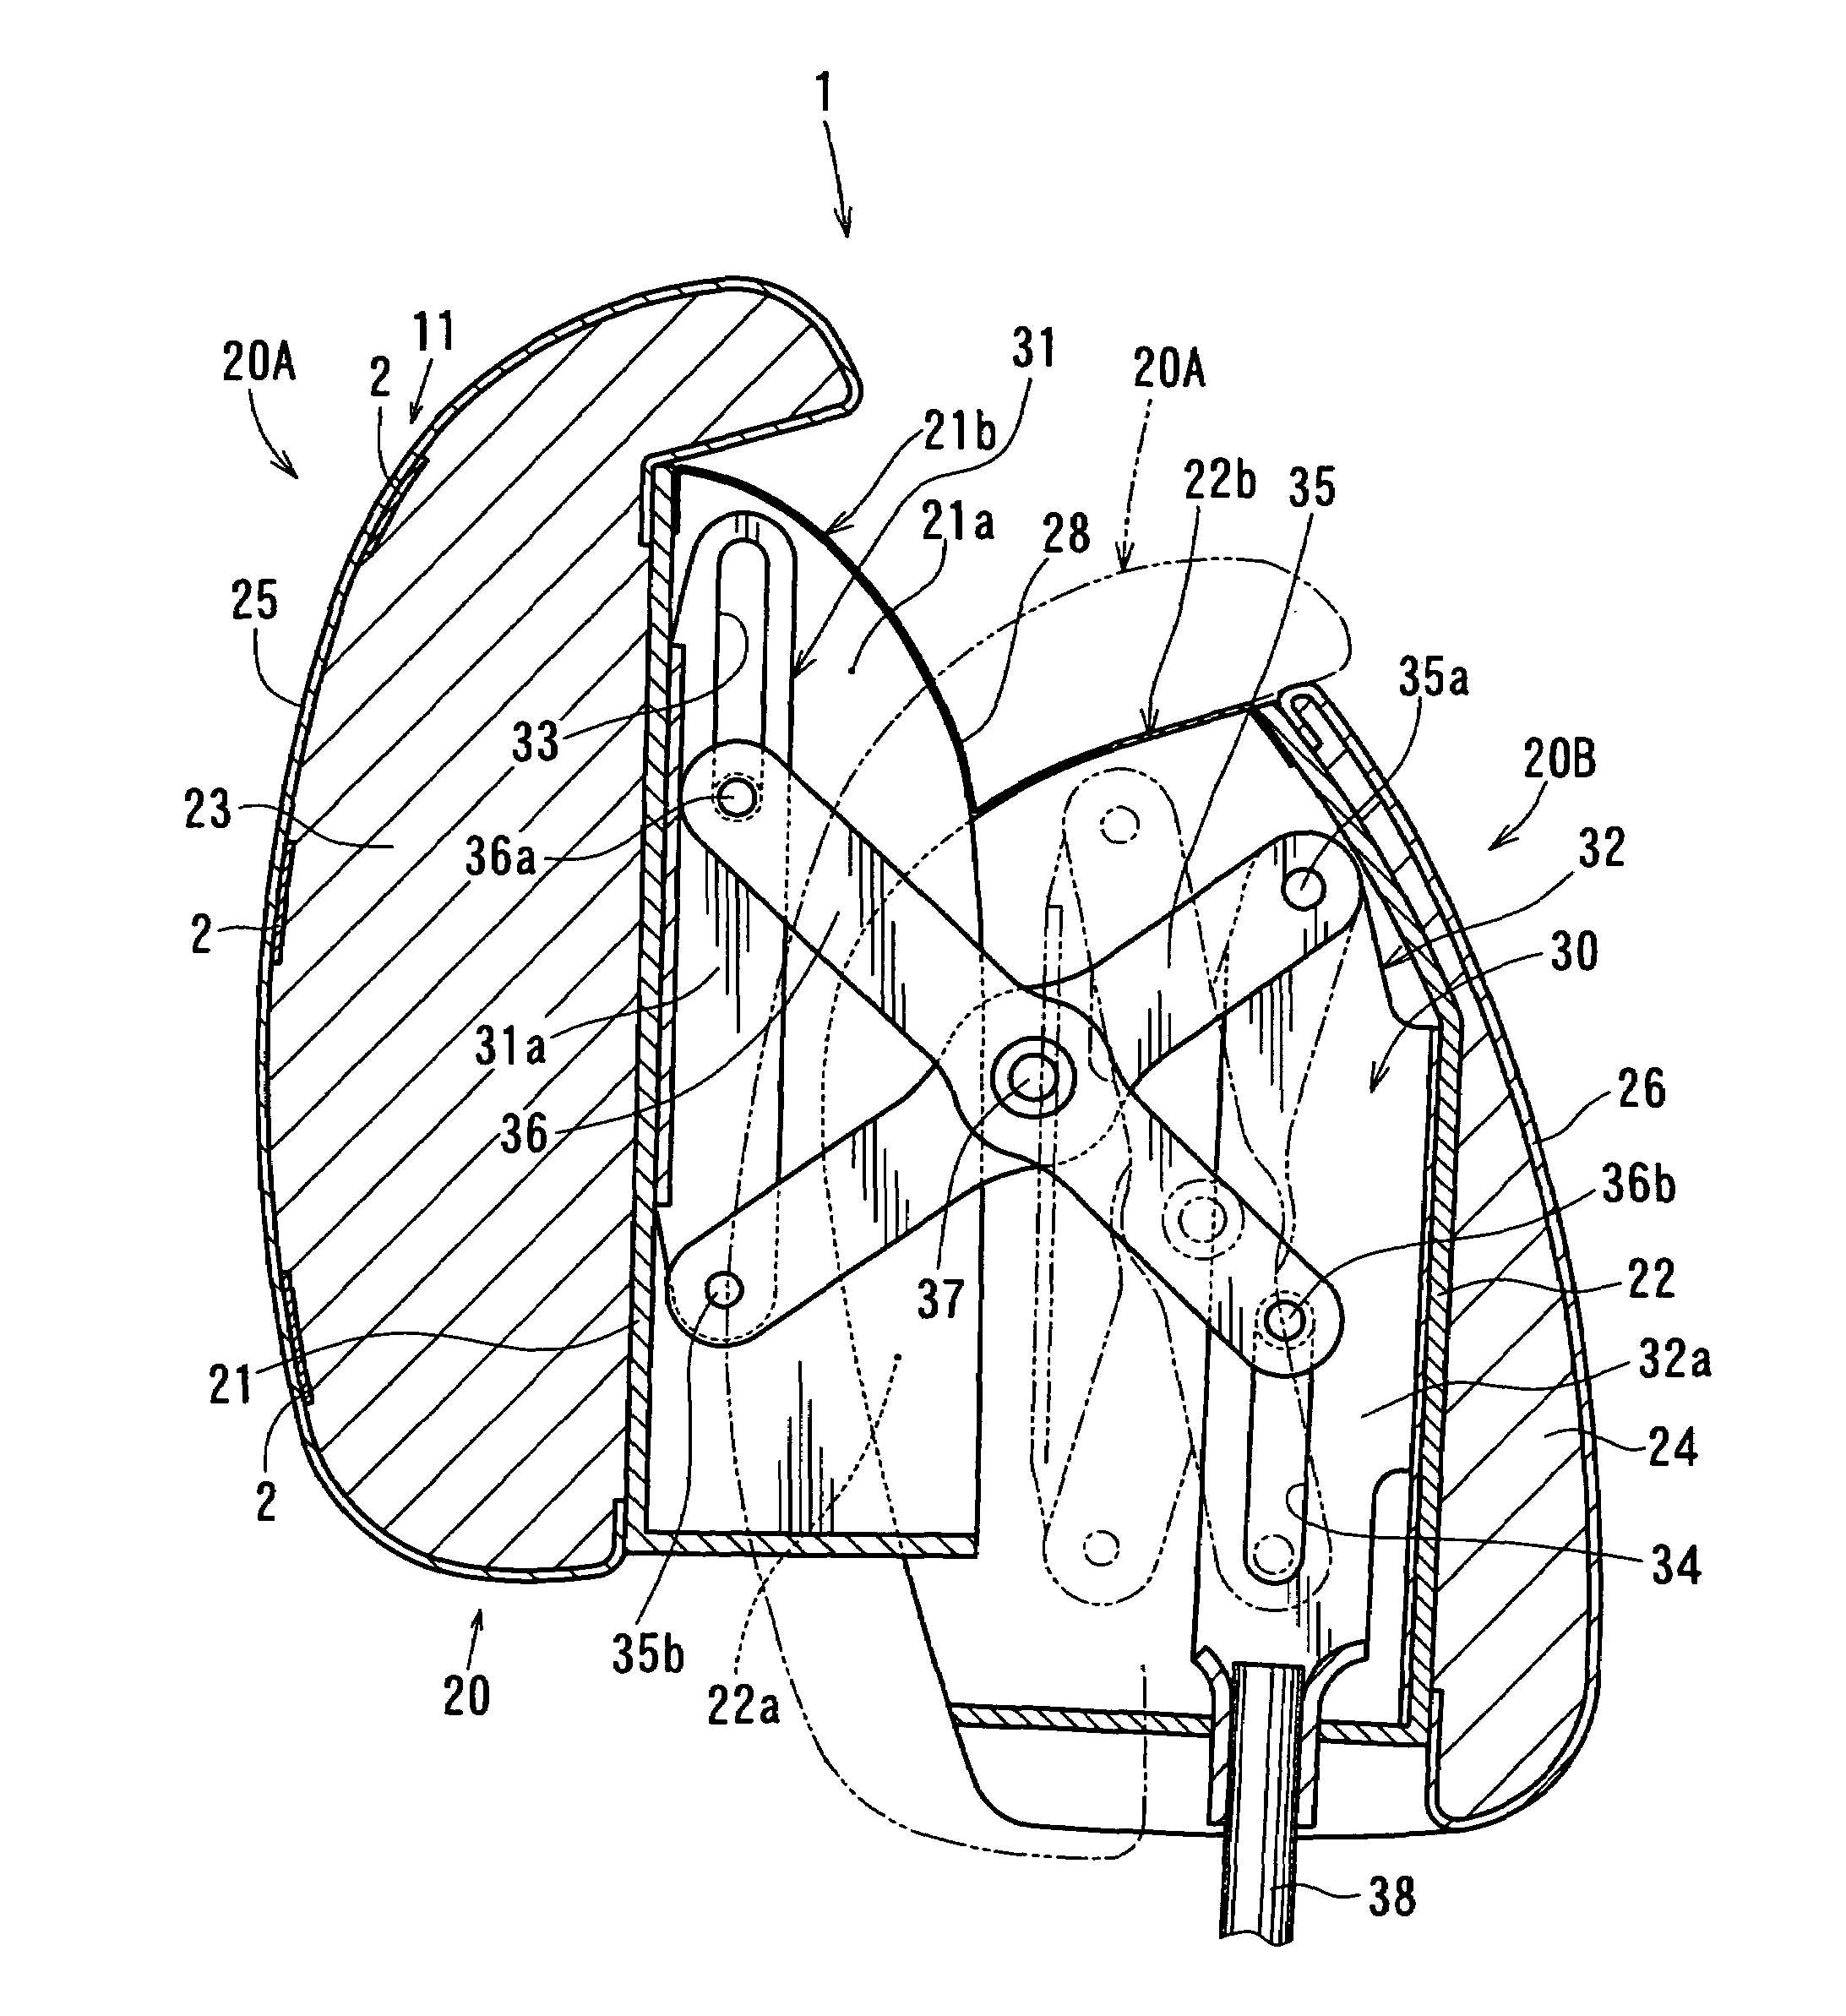 Head rest control device and active head rest